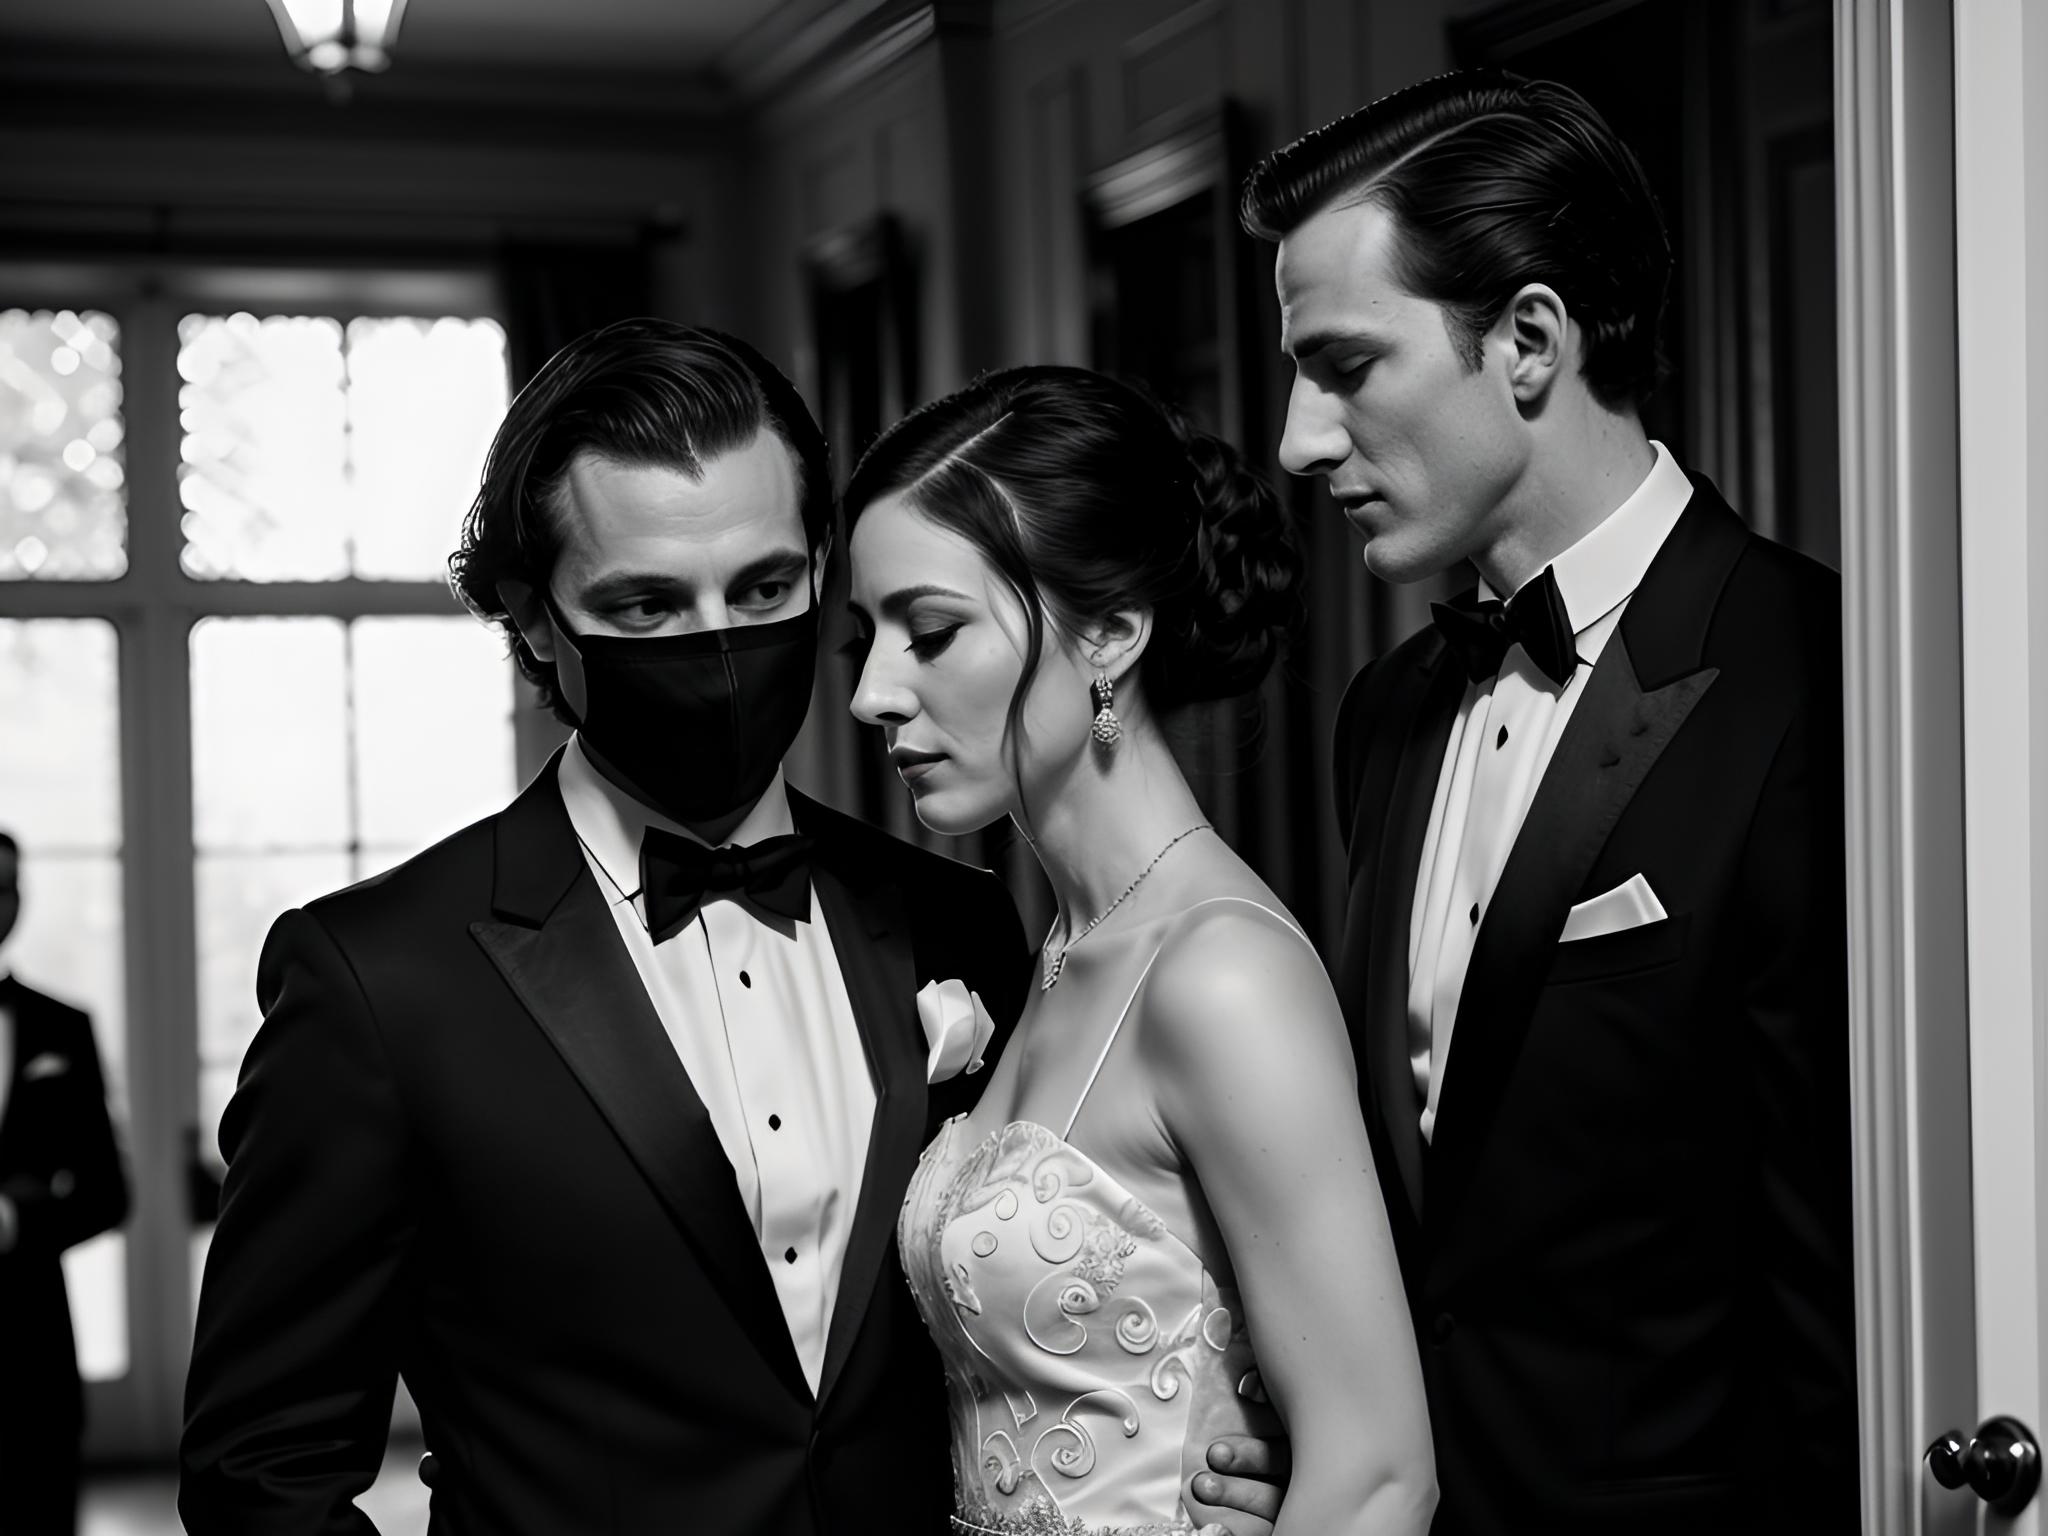 In the dimly lit corner of a grand estate's masquerade ball, a woman in an elegant gown and intricate mask locks eyes with her partner, a man in a tuxedo, as they join a passionate embrace with another masked couple, their anonymous desires driving their hedonistic indulgence in a thrilling dance of bodies, unaware of the sobering reality that awaits them when the masks come off and they must face the consequences of their darkest fantasies.